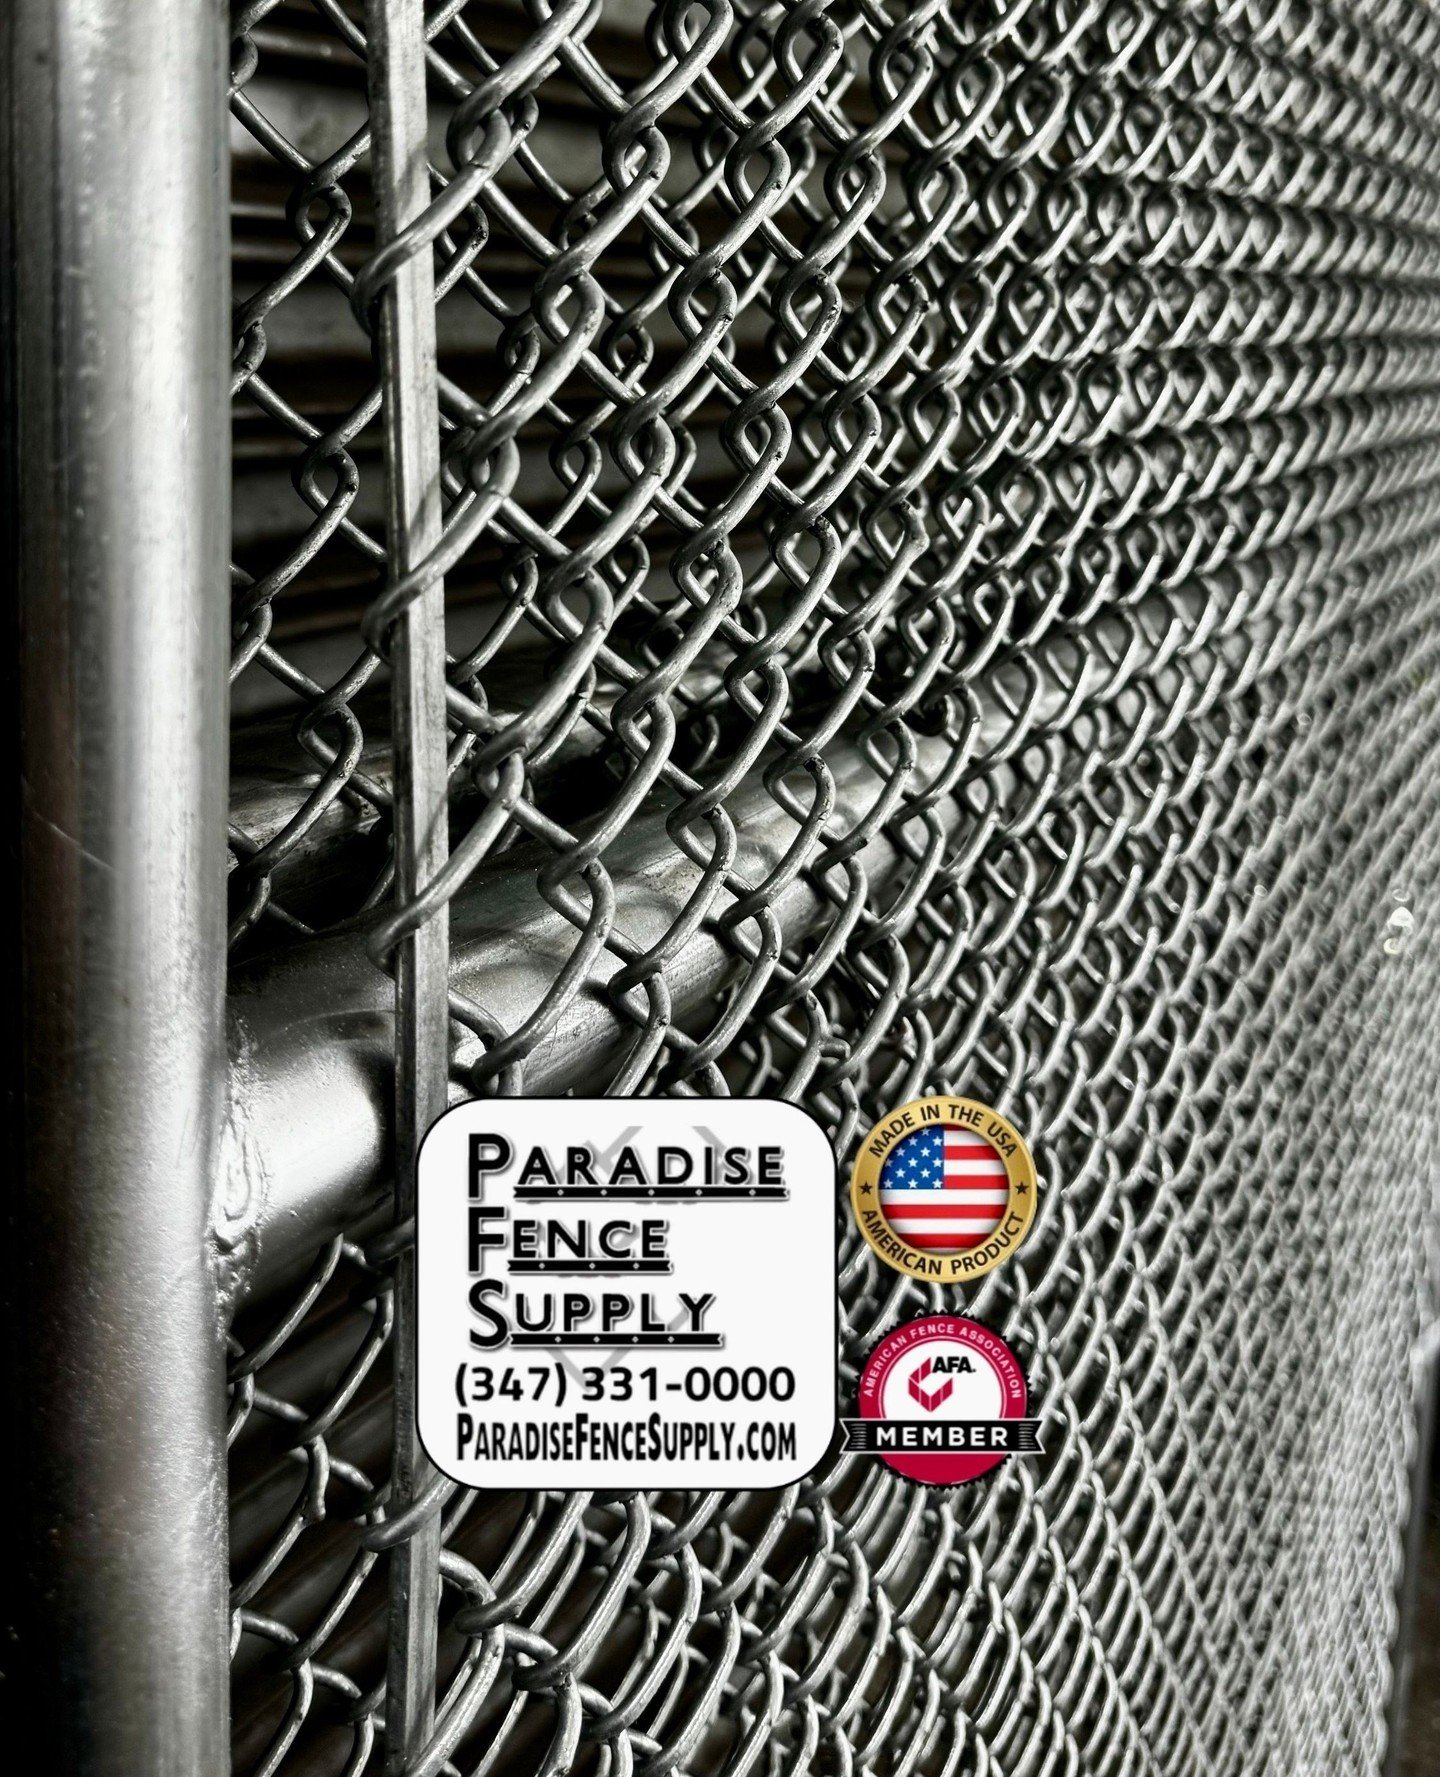 Custom chain-link gates manufactured by Paradise Fence Supply. Our chain-link gates are fabricated to your exact specifications for size, height, and style. Contact us today for all your chain-link fence needs. (347) 331-0000 ParadiseFenceSupply.com 